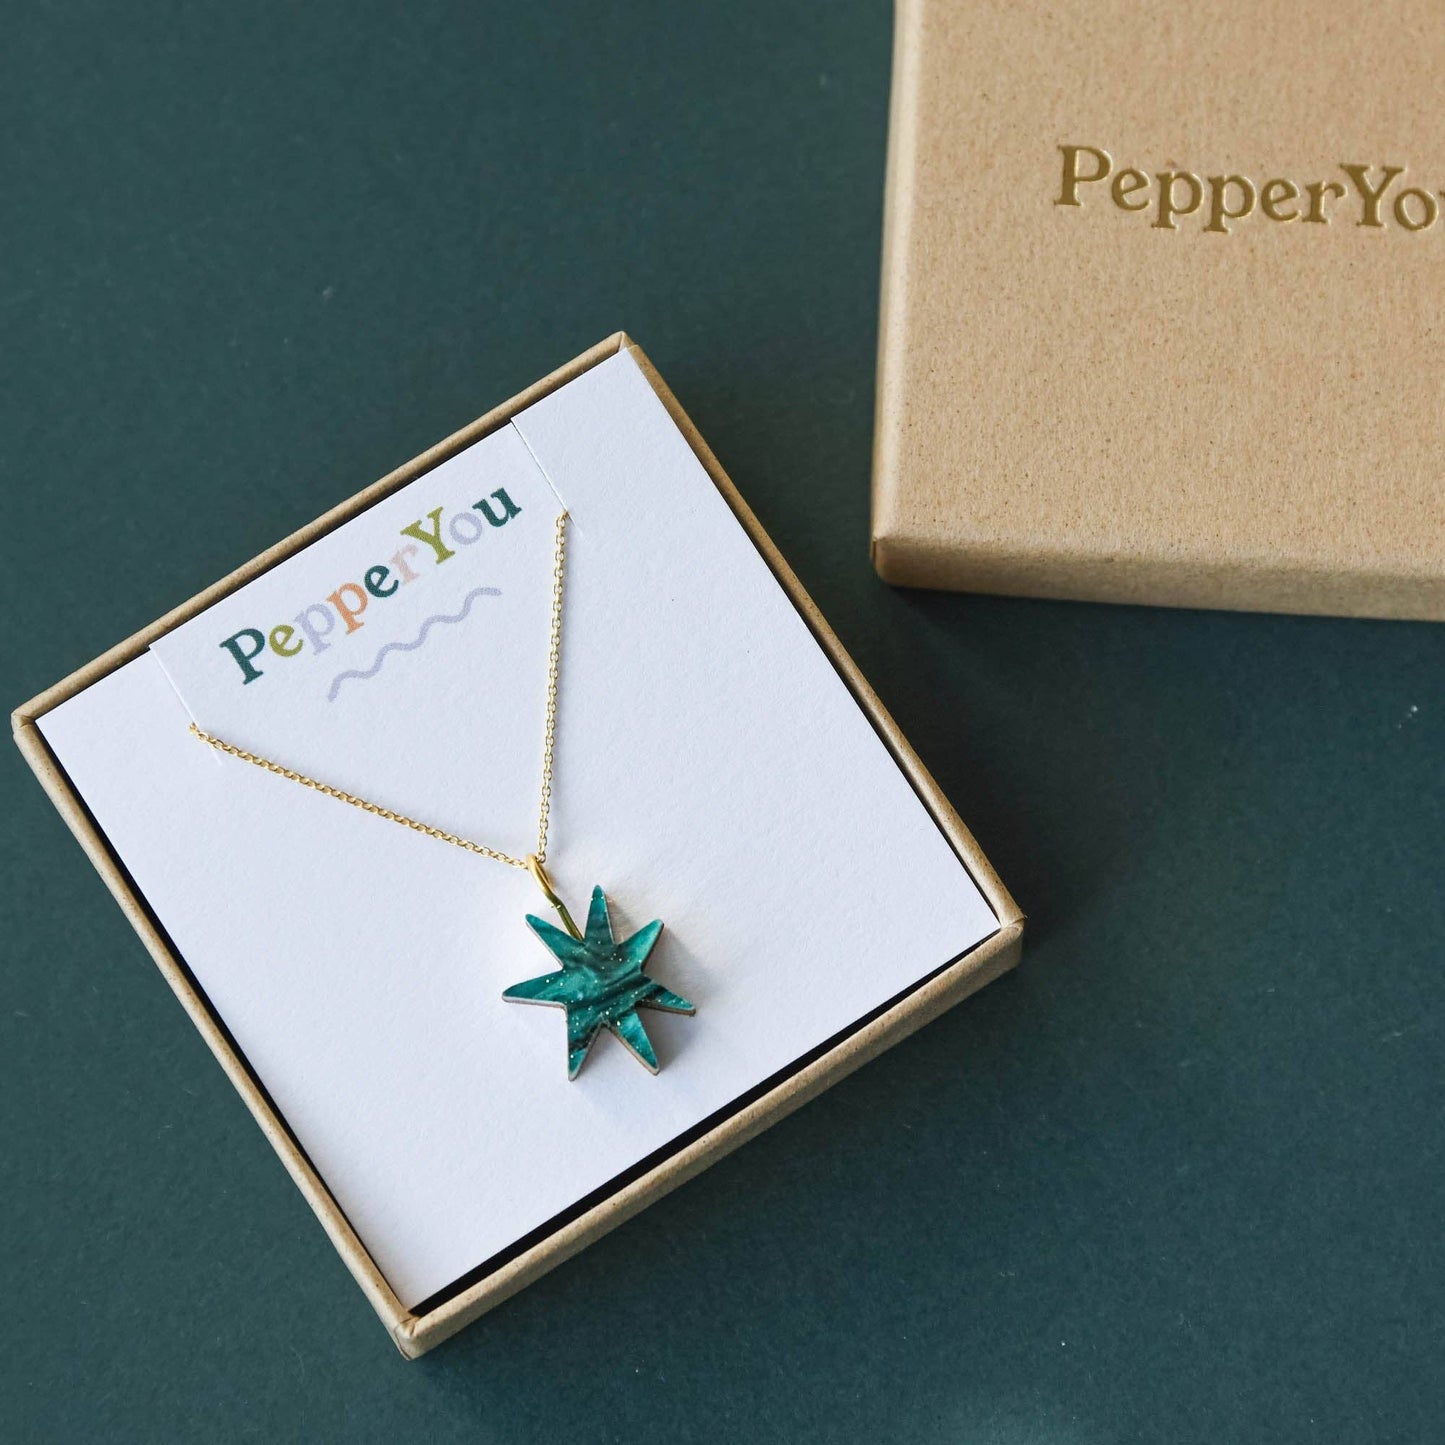 Pepper You Hand Drawn Star Gold Necklace in Smoke Black Sparkle: Marble Teal Sparkle